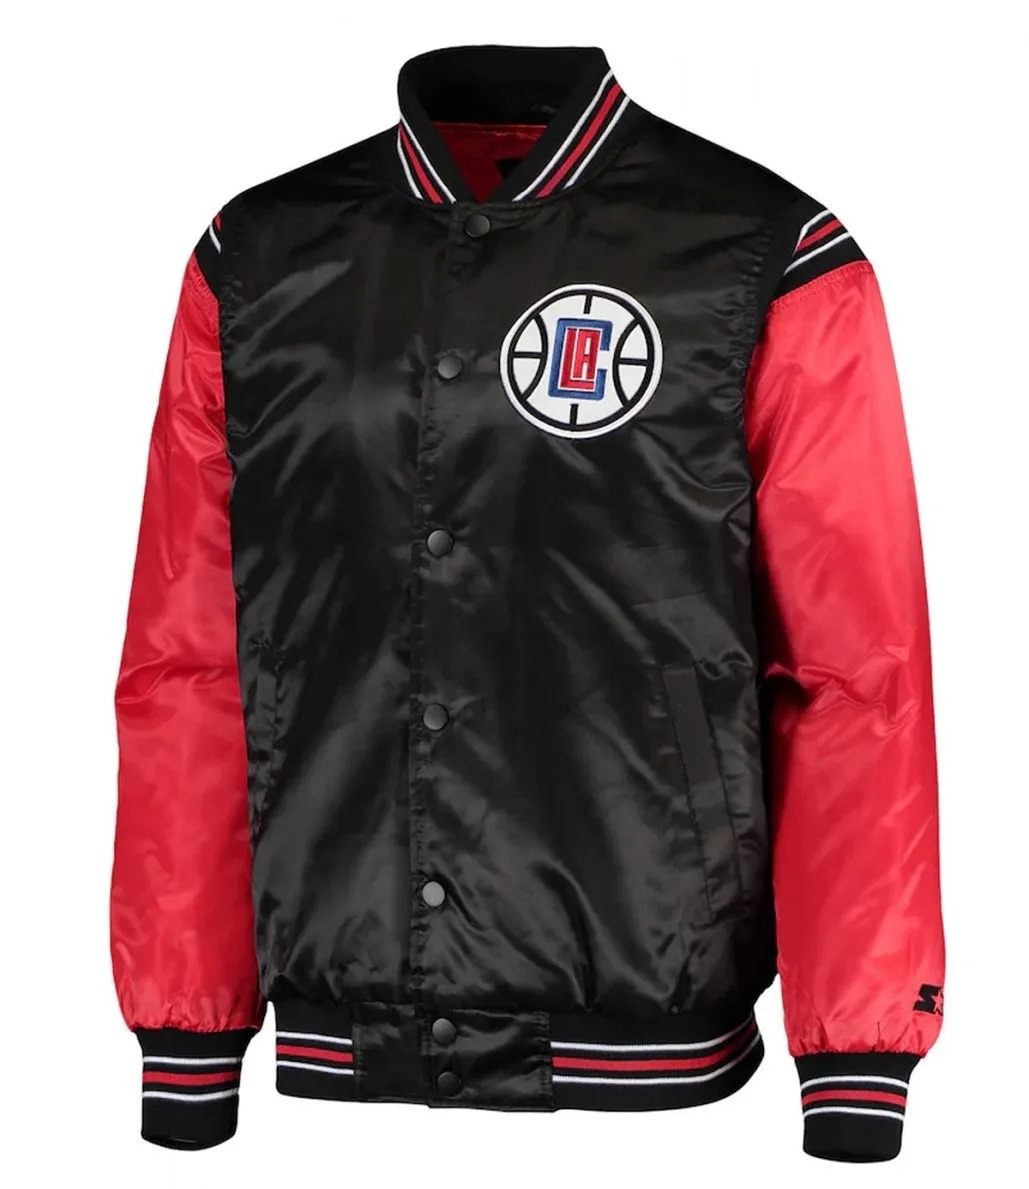 Los Angeles Clippers The Enforcer Satin Black and Red Jacket